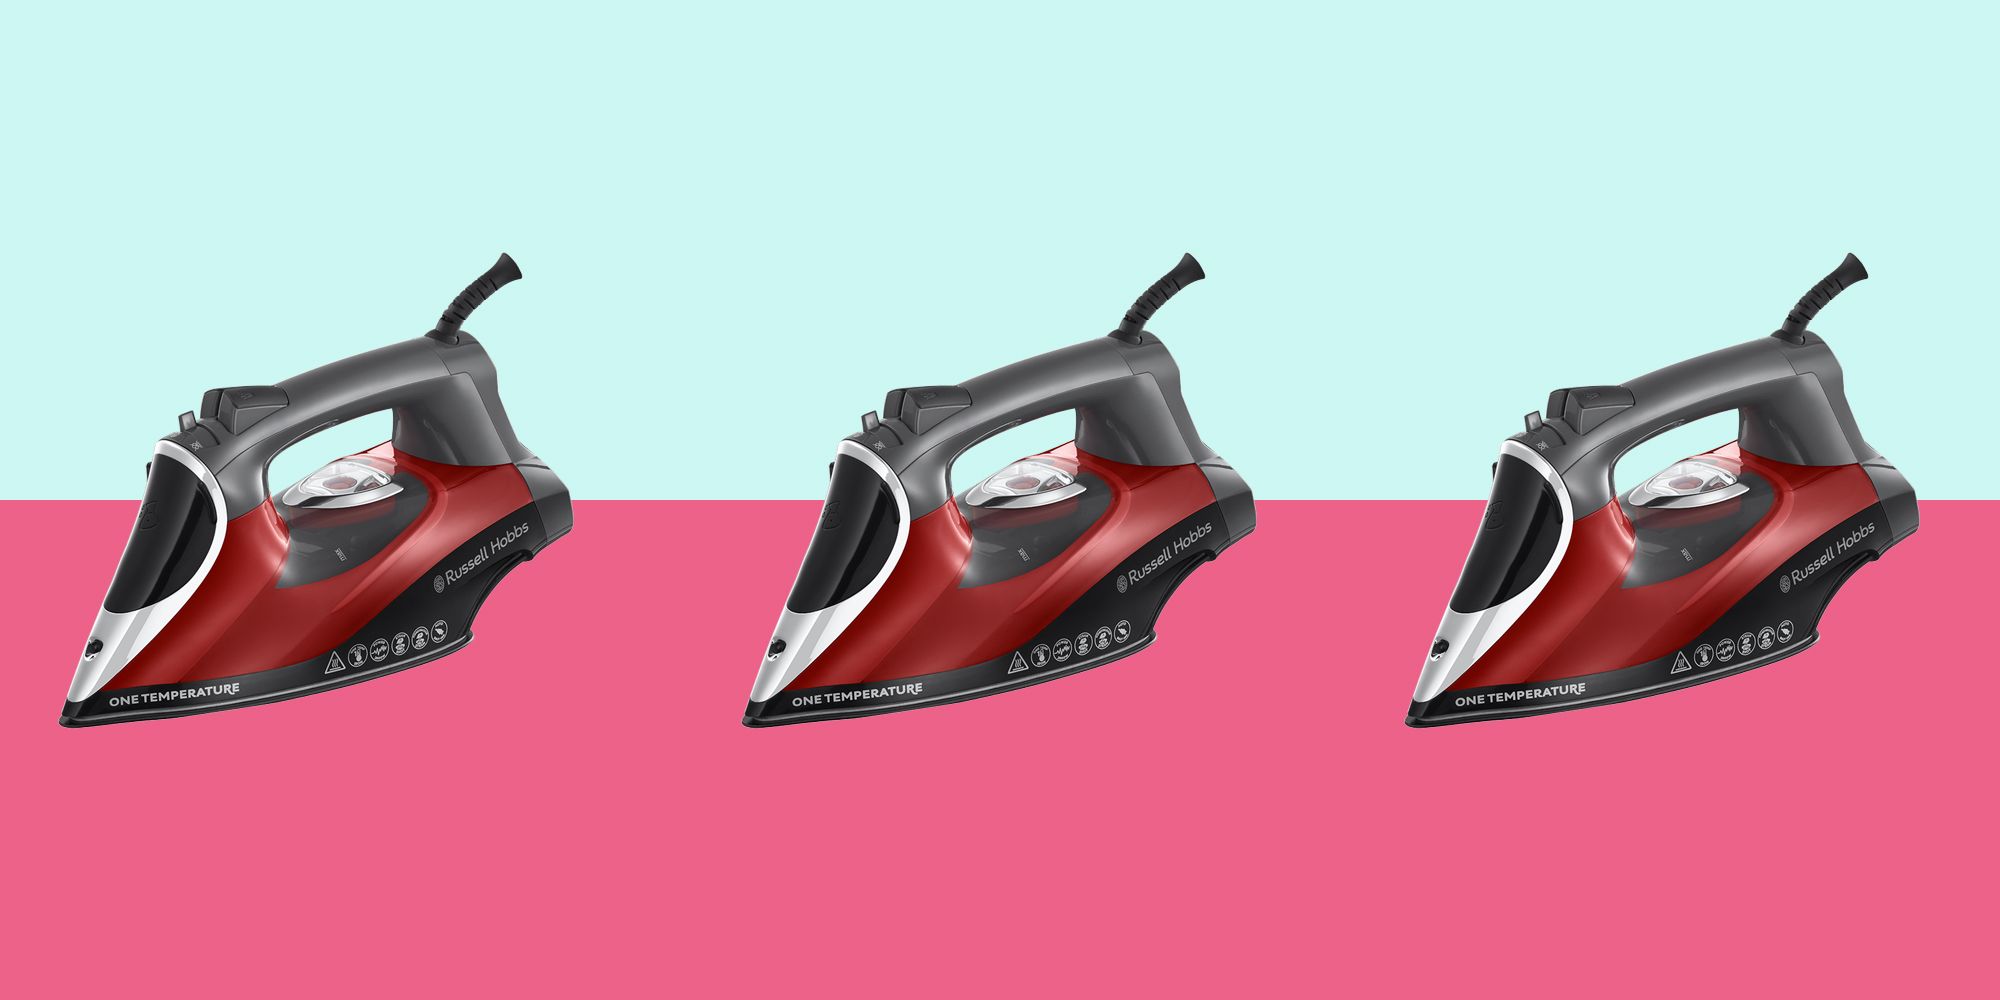 best steam iron for home use